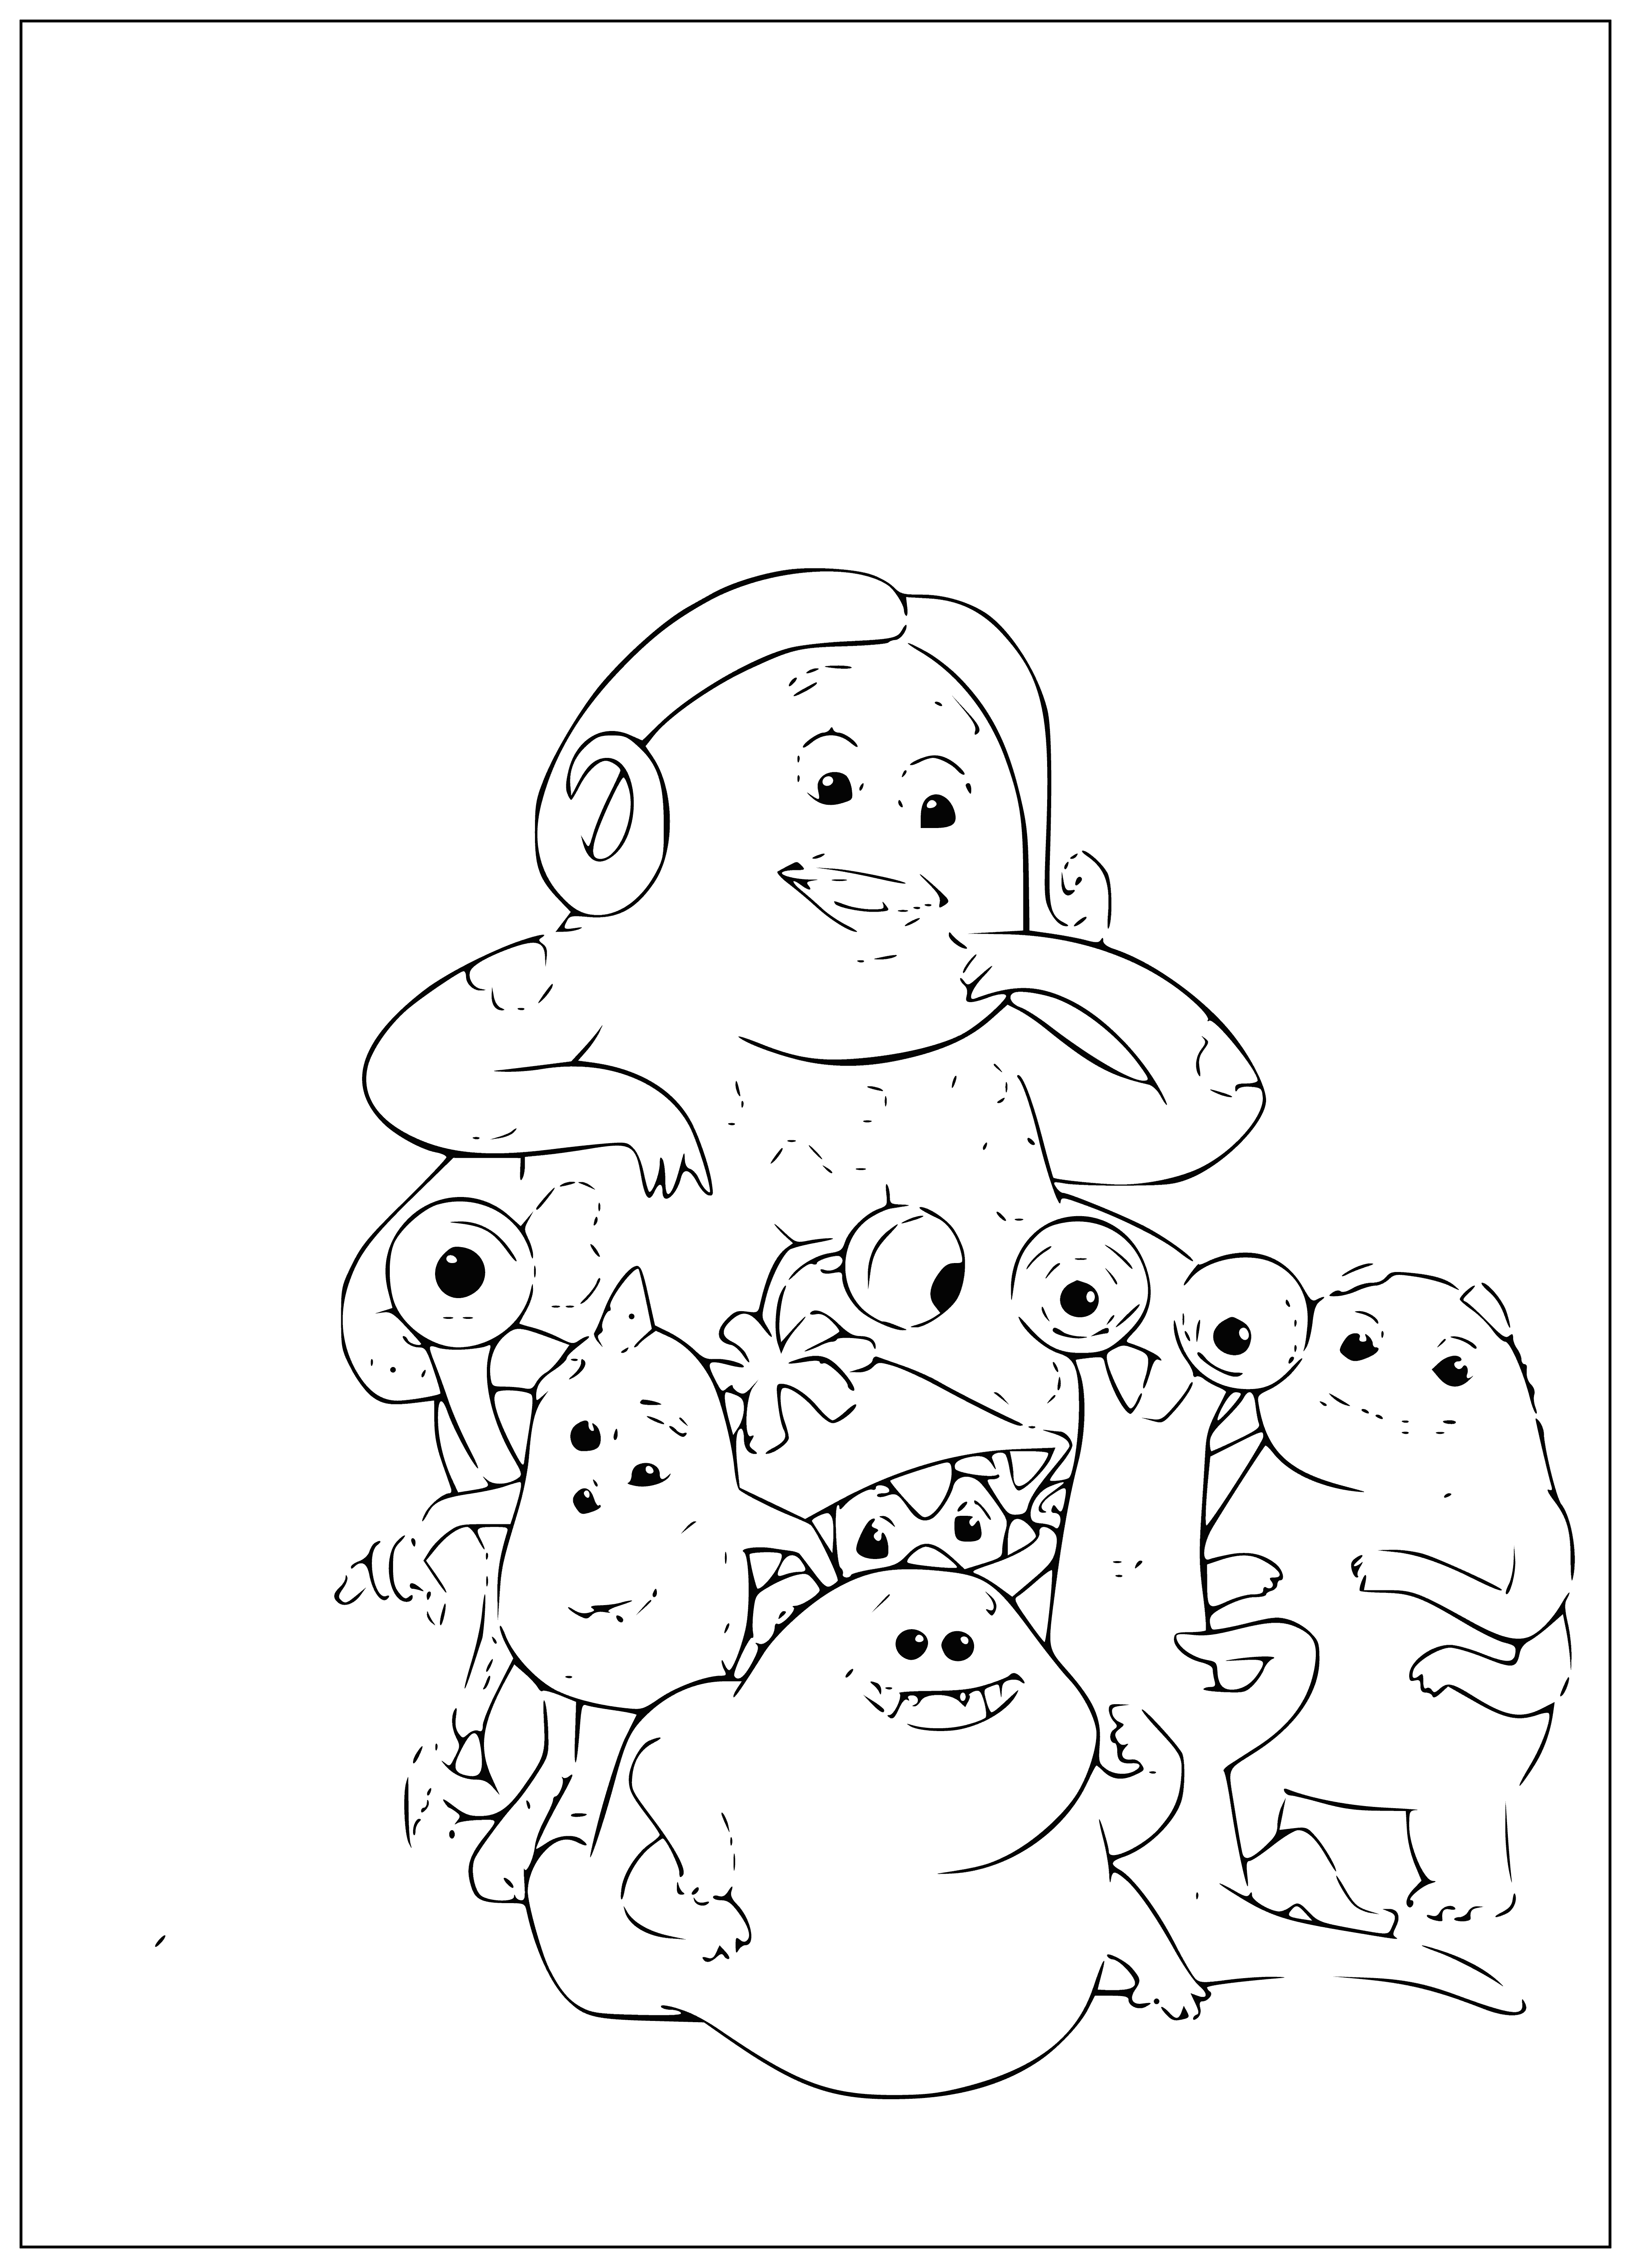 coloring page: Large yellowish-green monster with four eyes, holding blue ball and four smaller monsters looking at him. Four different colors, unique features.